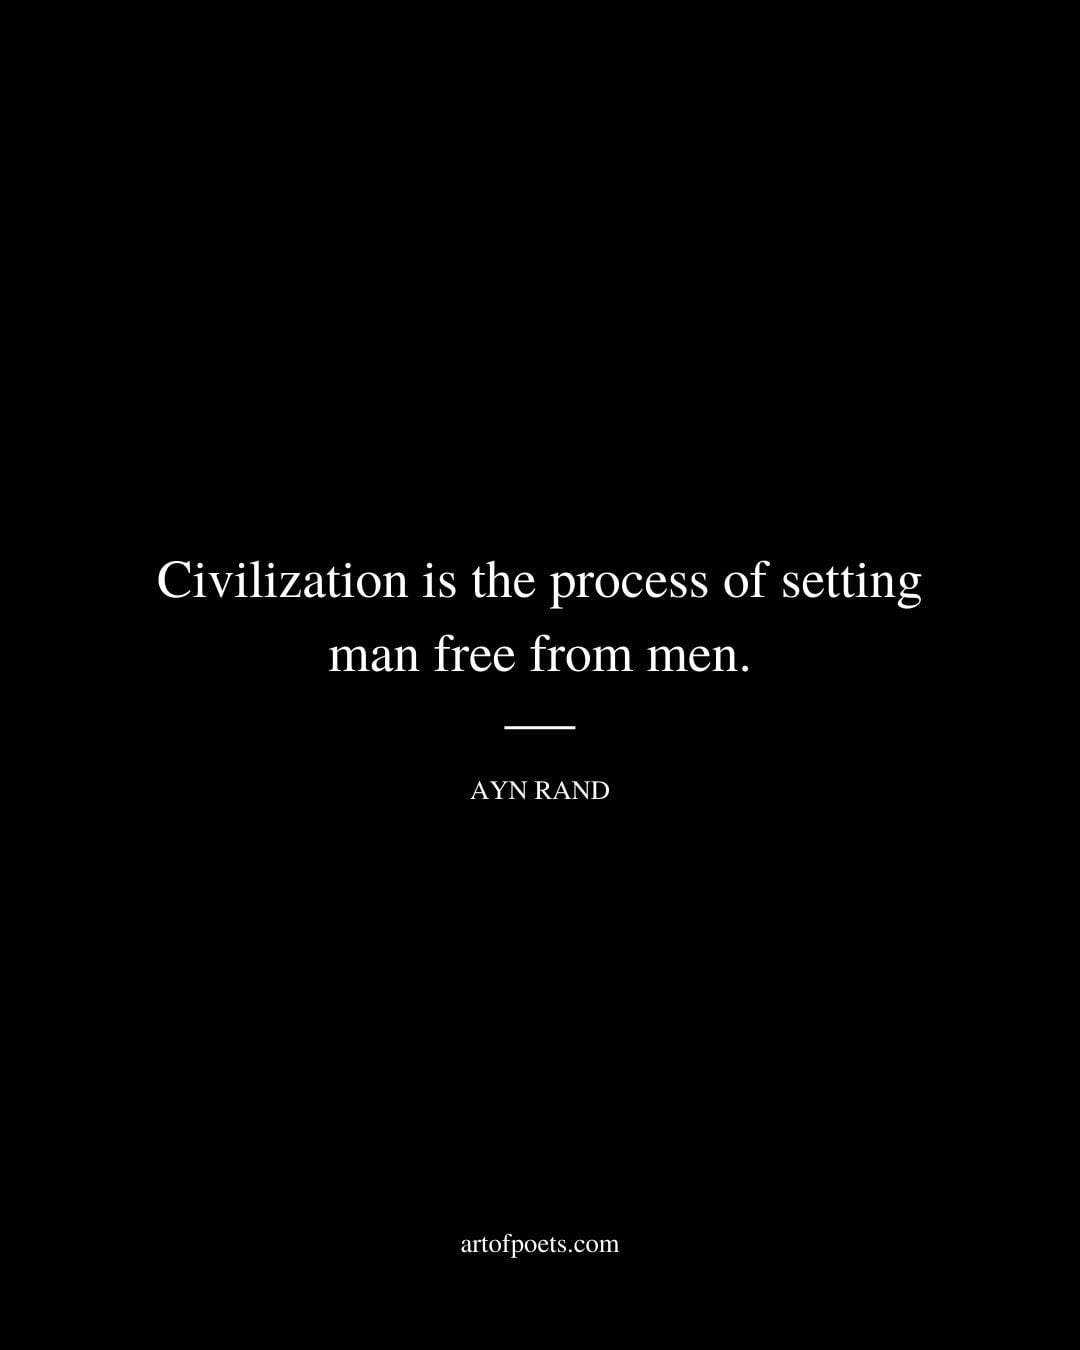 Civilization is the process of setting man free from men